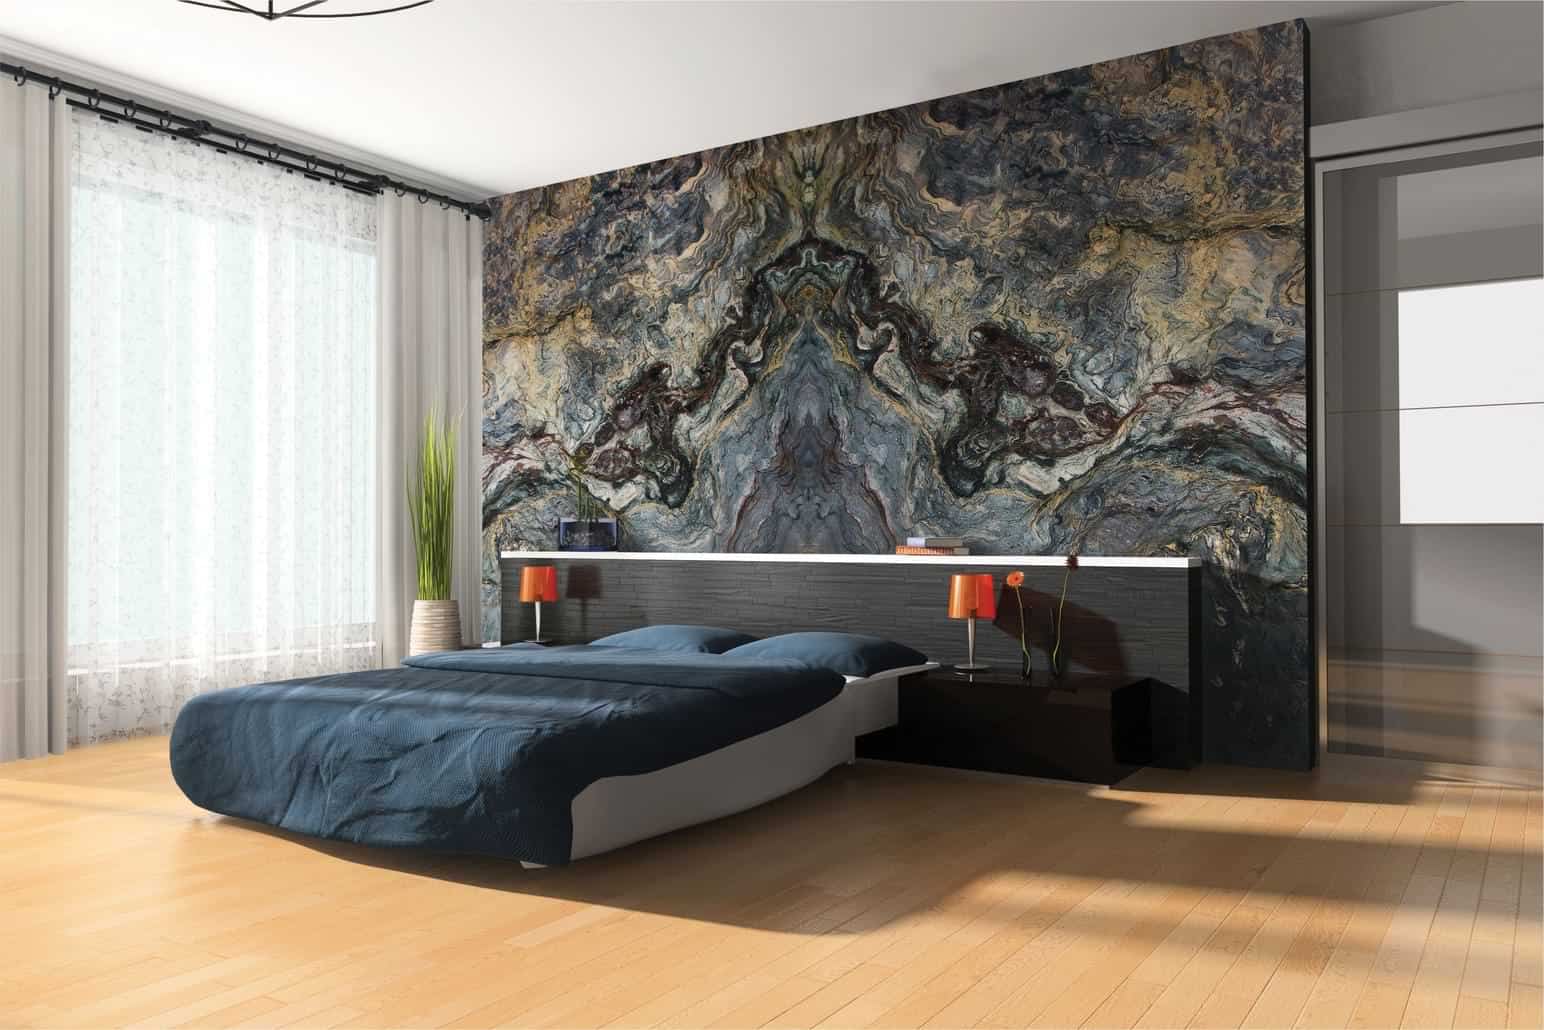 Modern bedroom with natural stone quartz wall